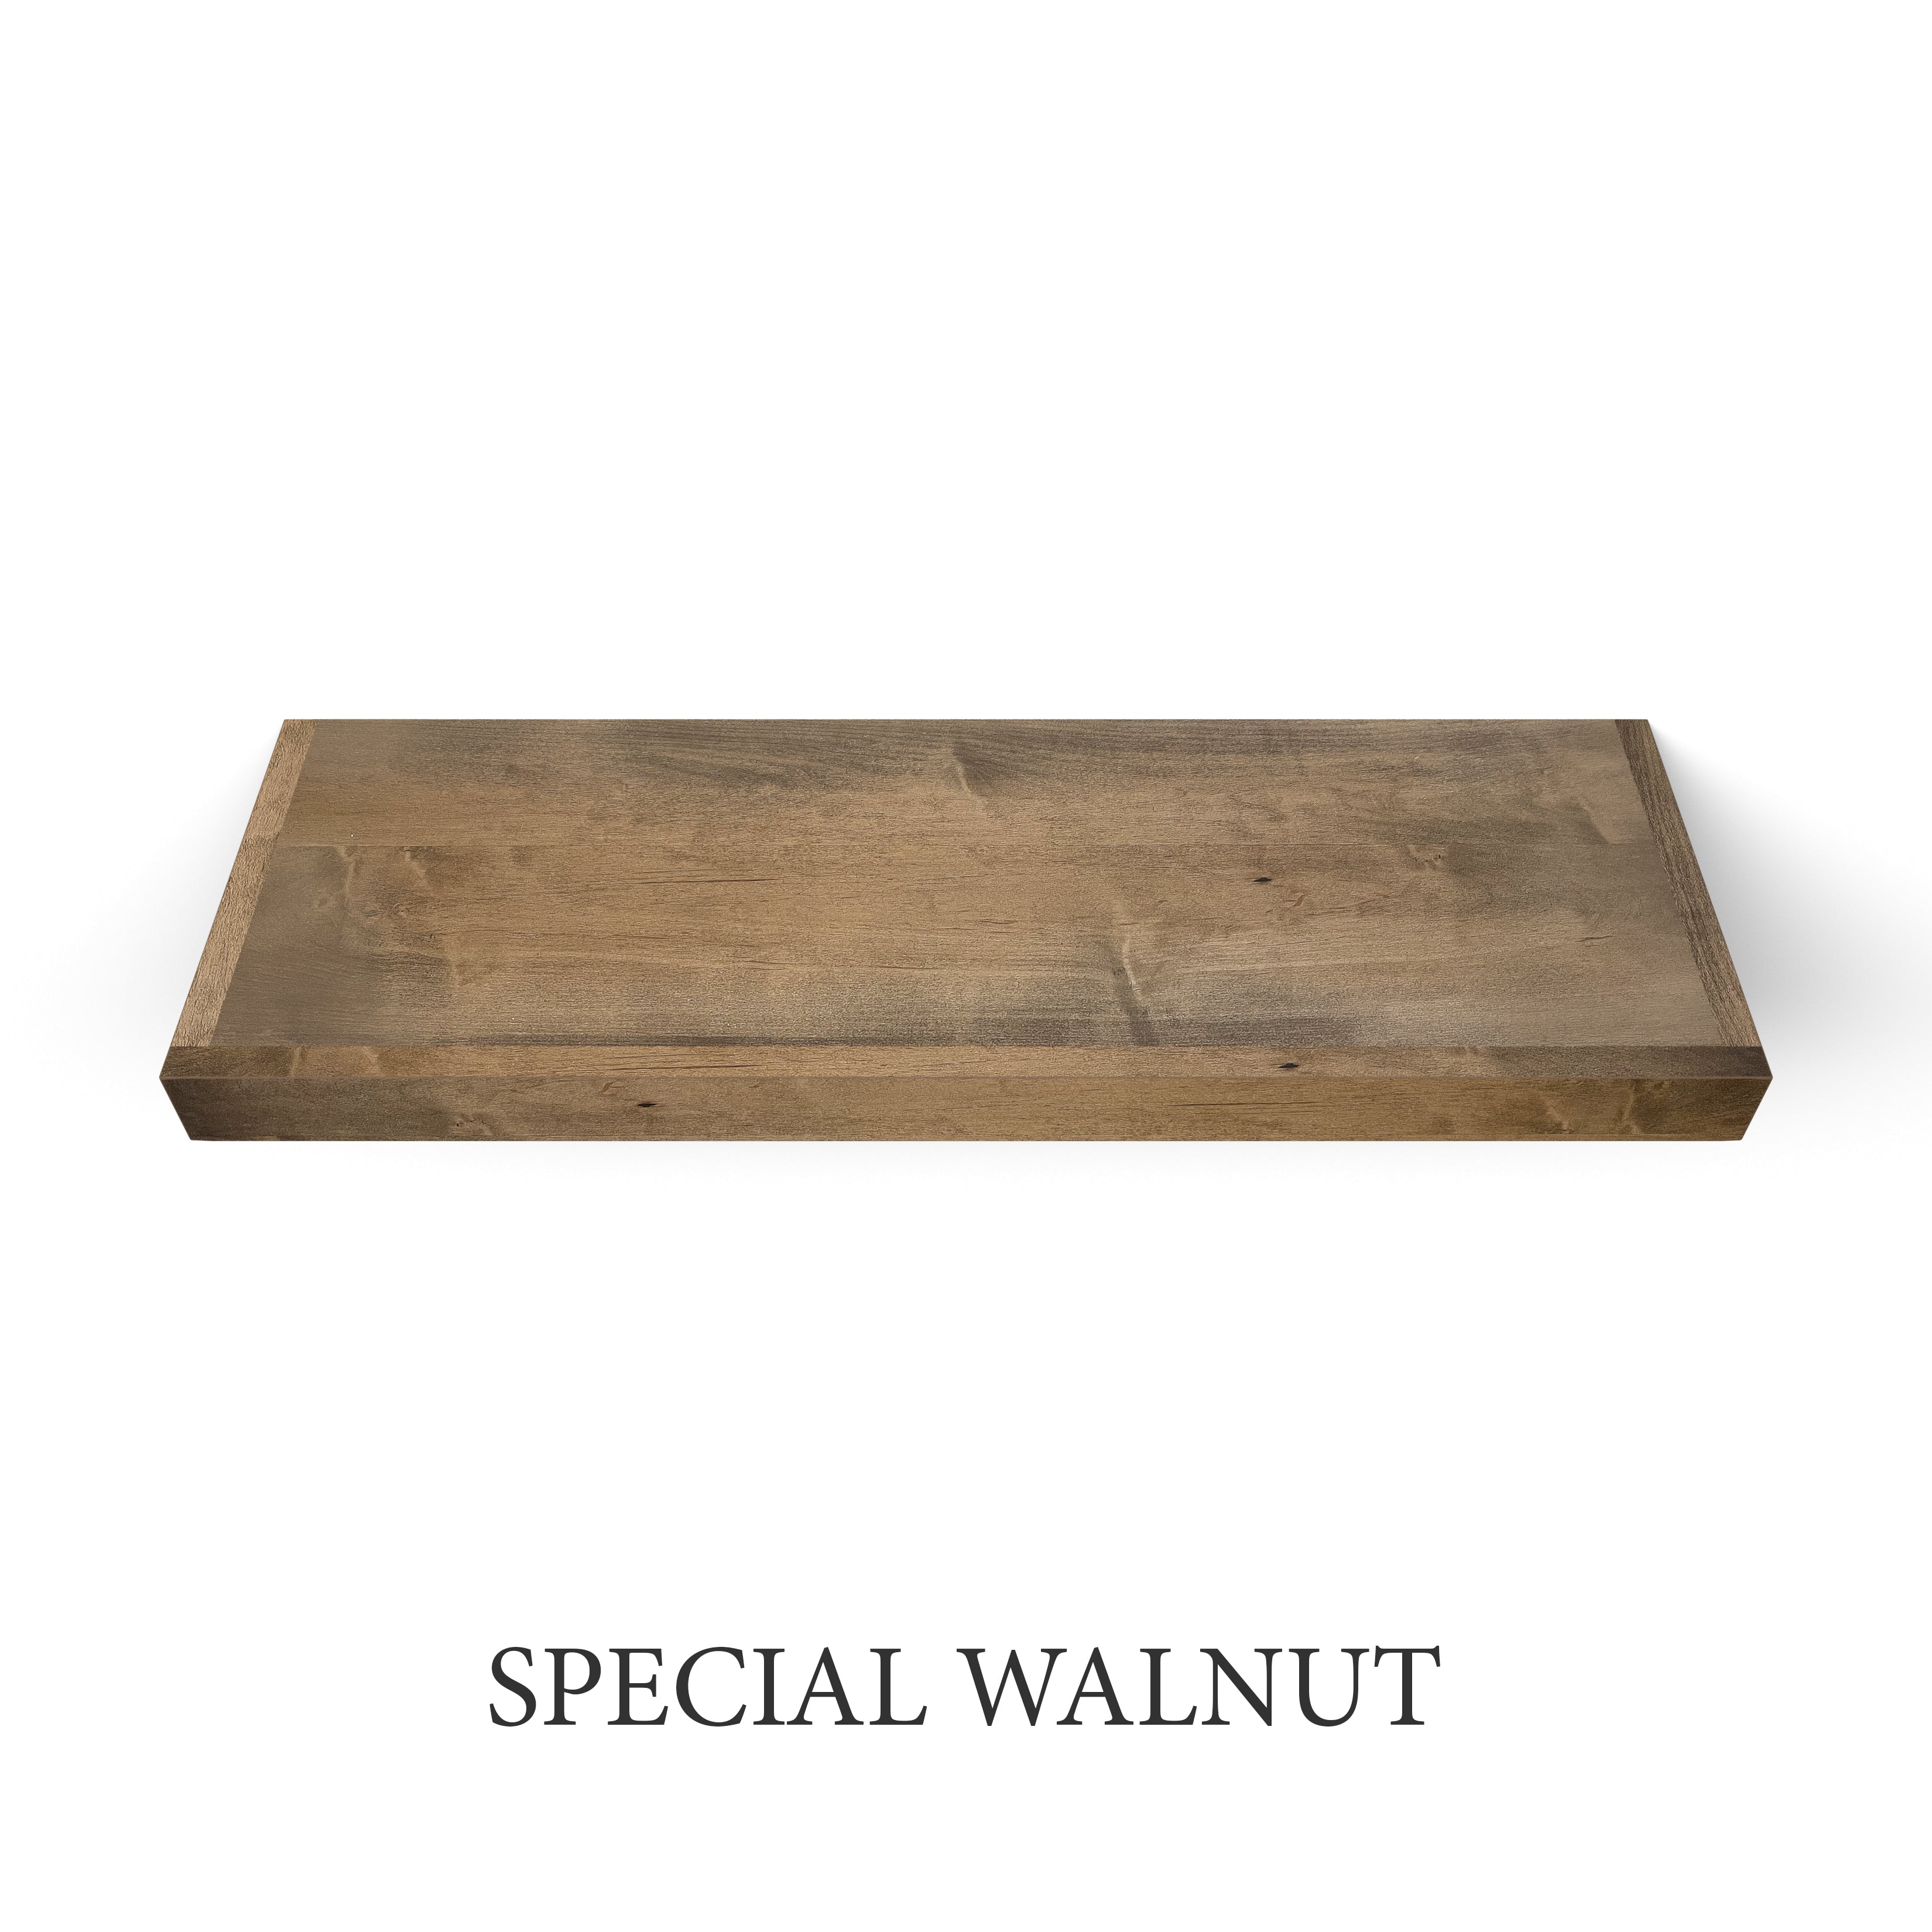 special walnut Maple 2 Inch LED Lighted Floating Shelf - Battery